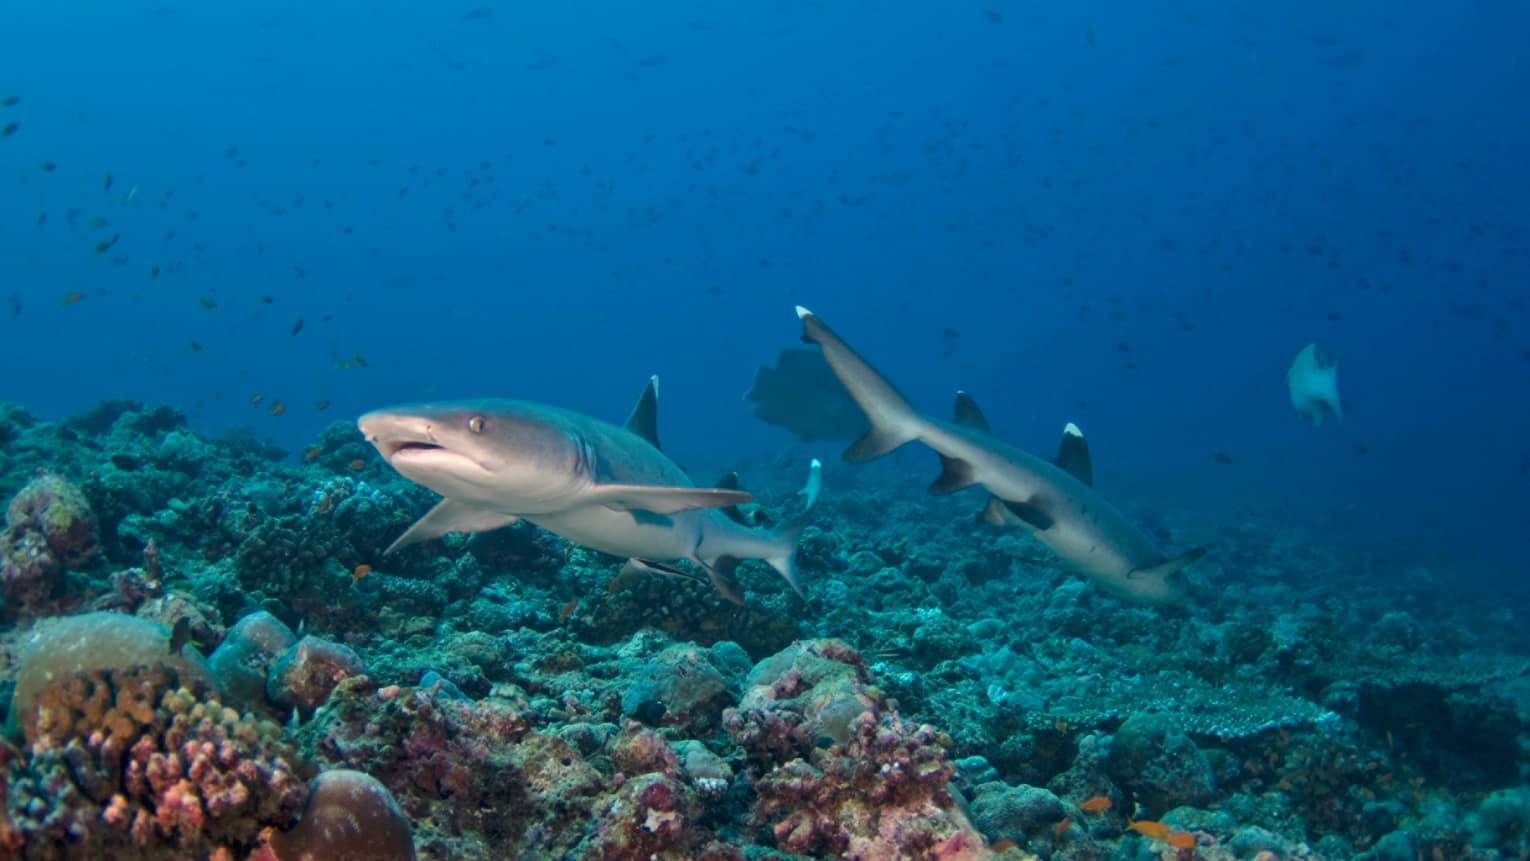 Two sharks swimming in the ocean with coral reefs at the bottom.